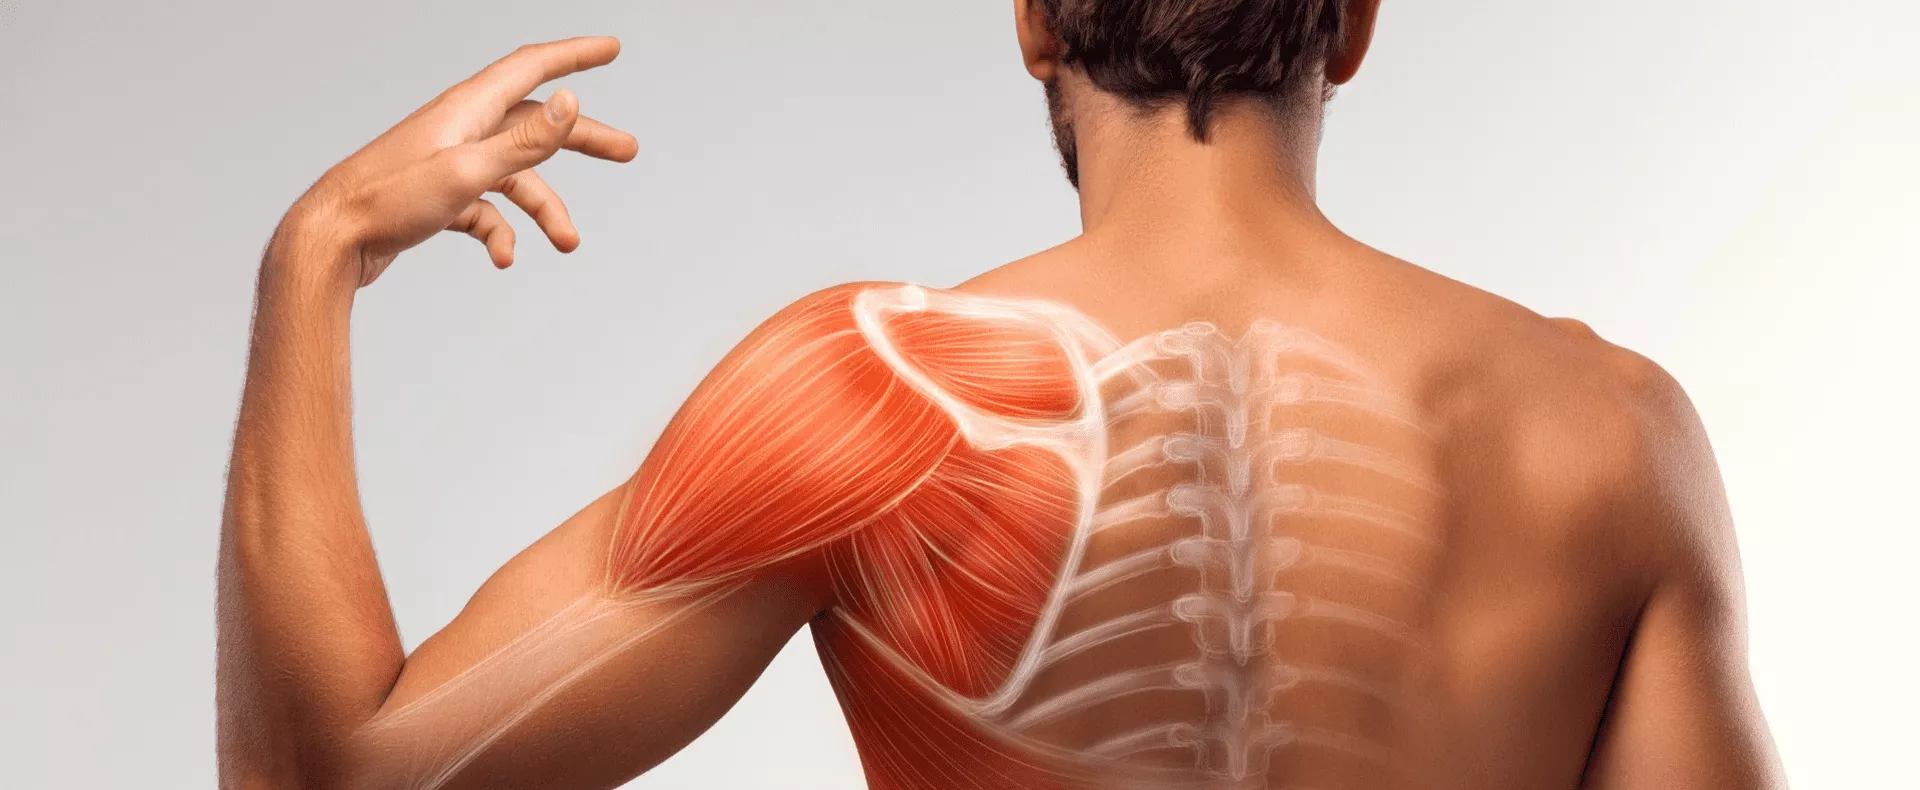 Physiotherapy in Dubai